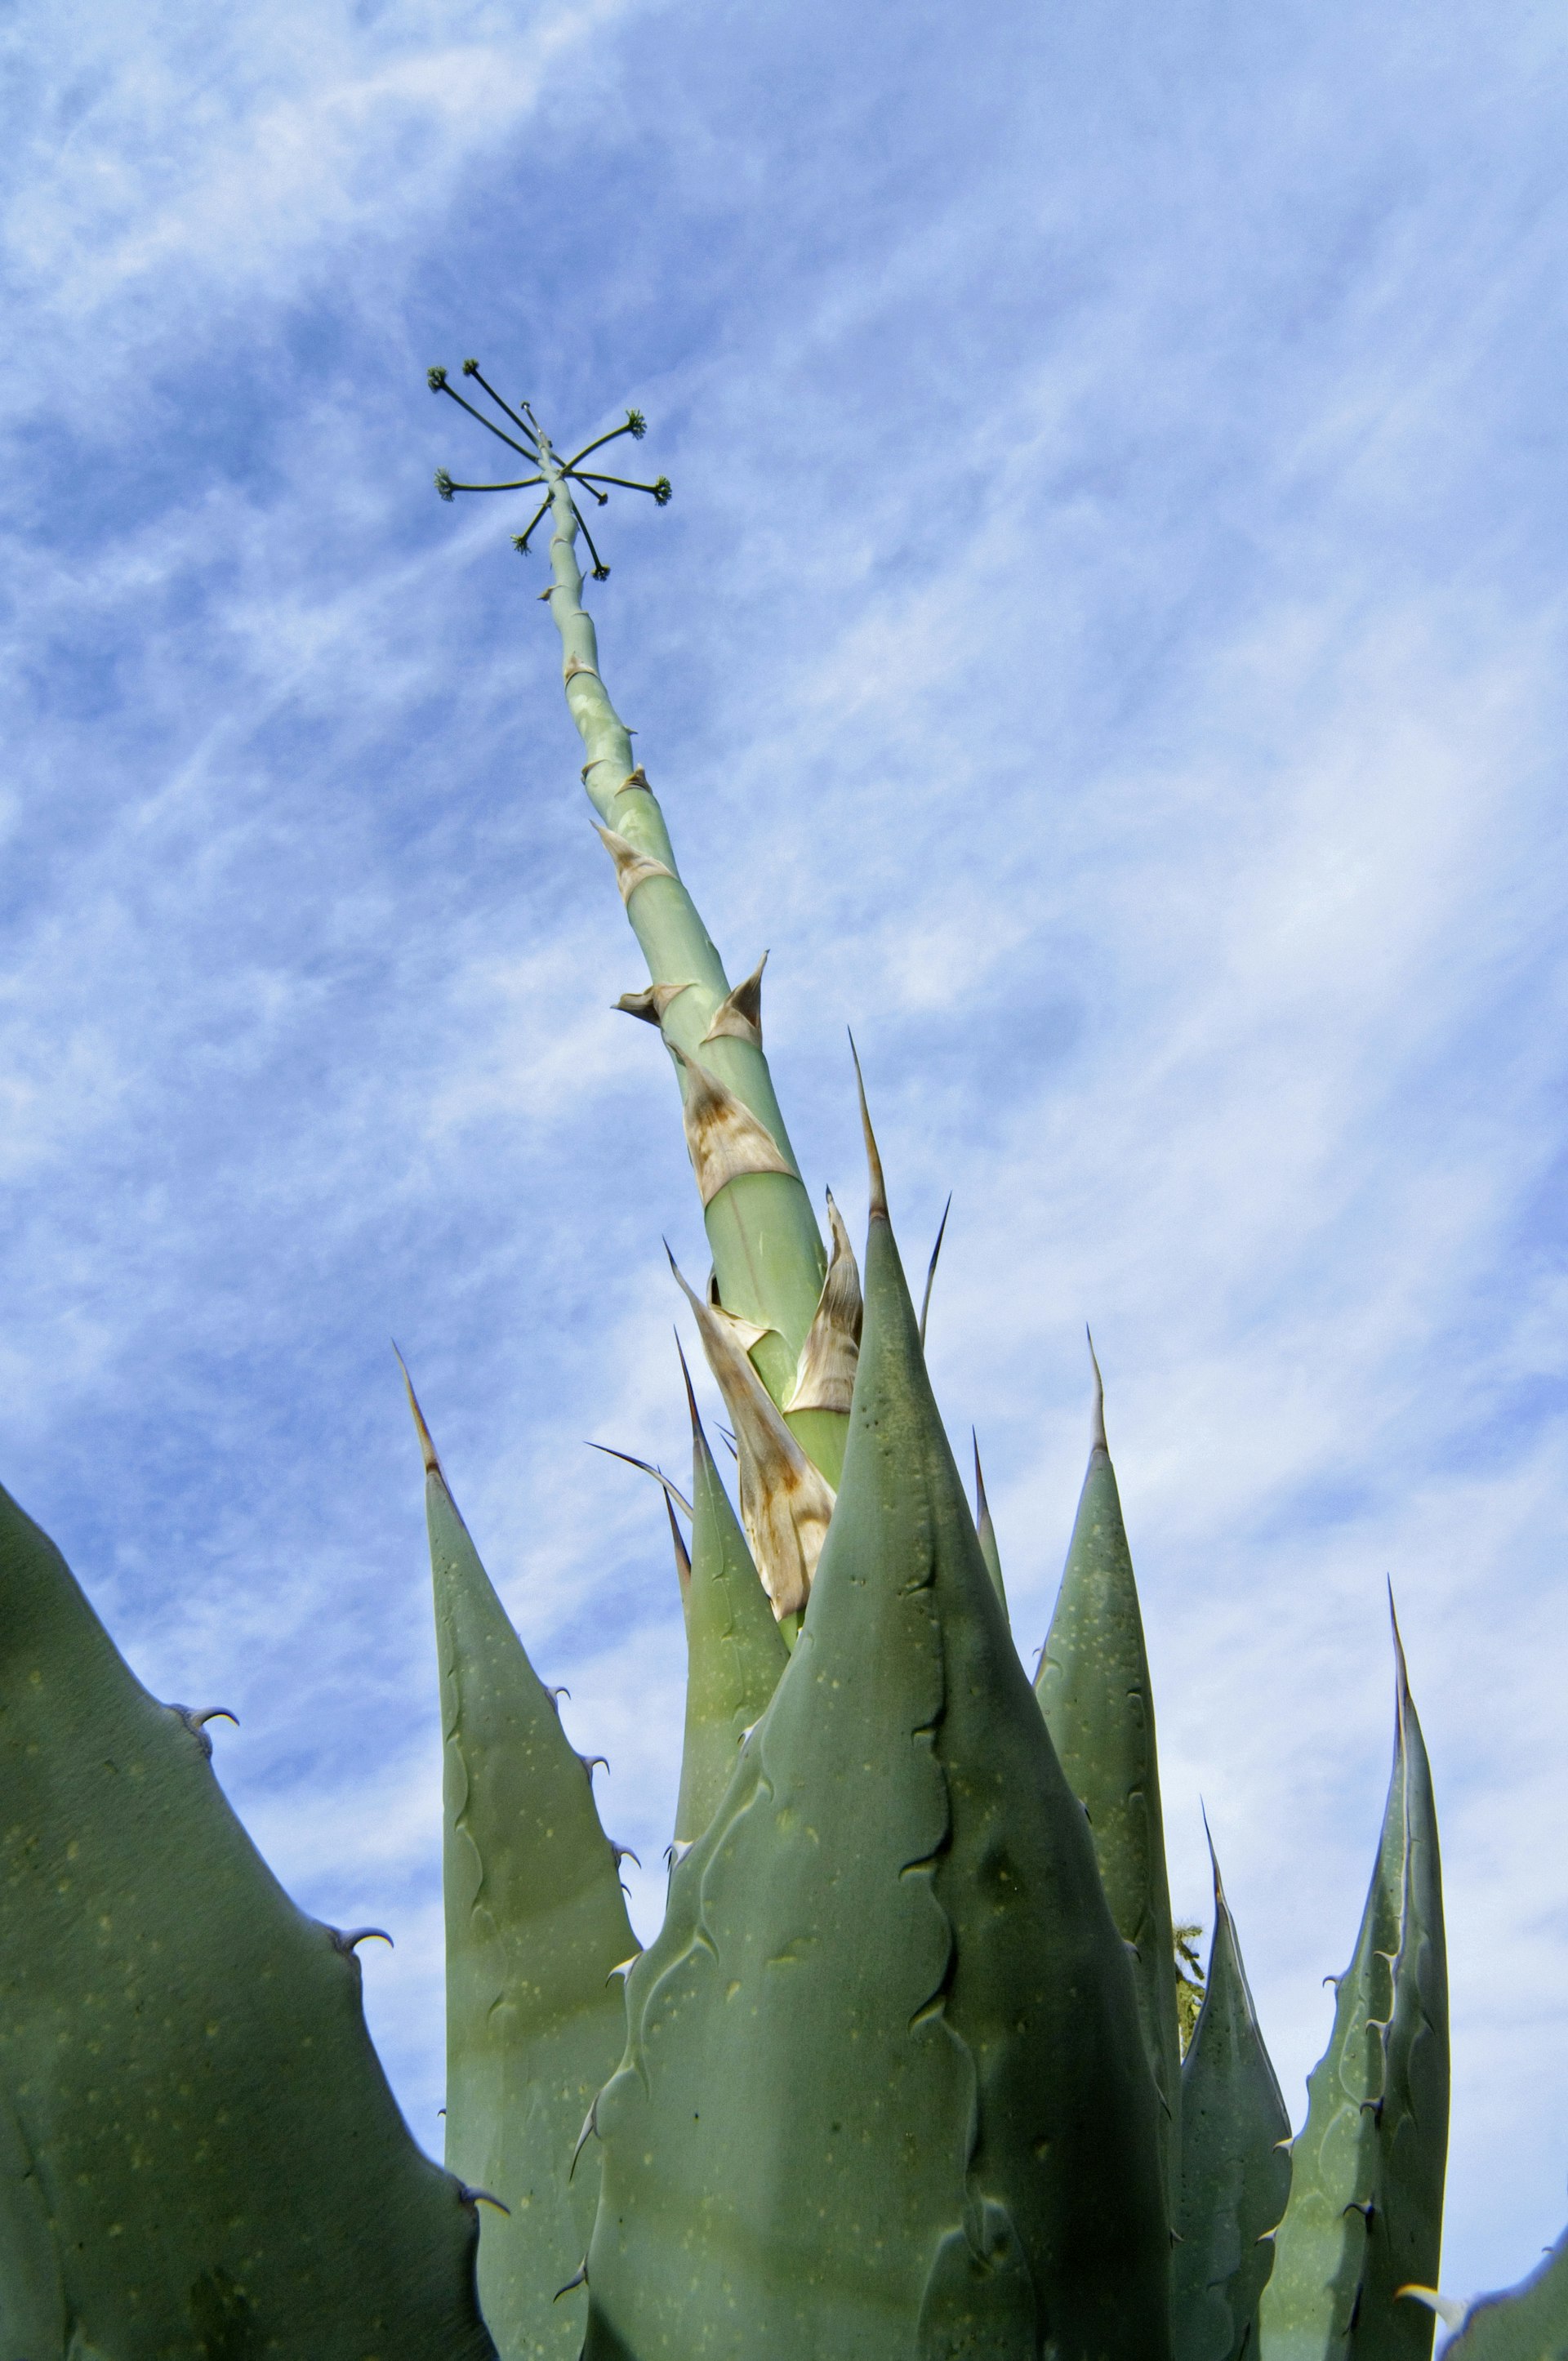 Parry's century plant / Parry's agave / mescal agave (Agave parryi) native to Arizona, New Mexico, and northern Mexico showing spiny leaves and stalk. (Photo by: Arterra/UIG via Getty Images)